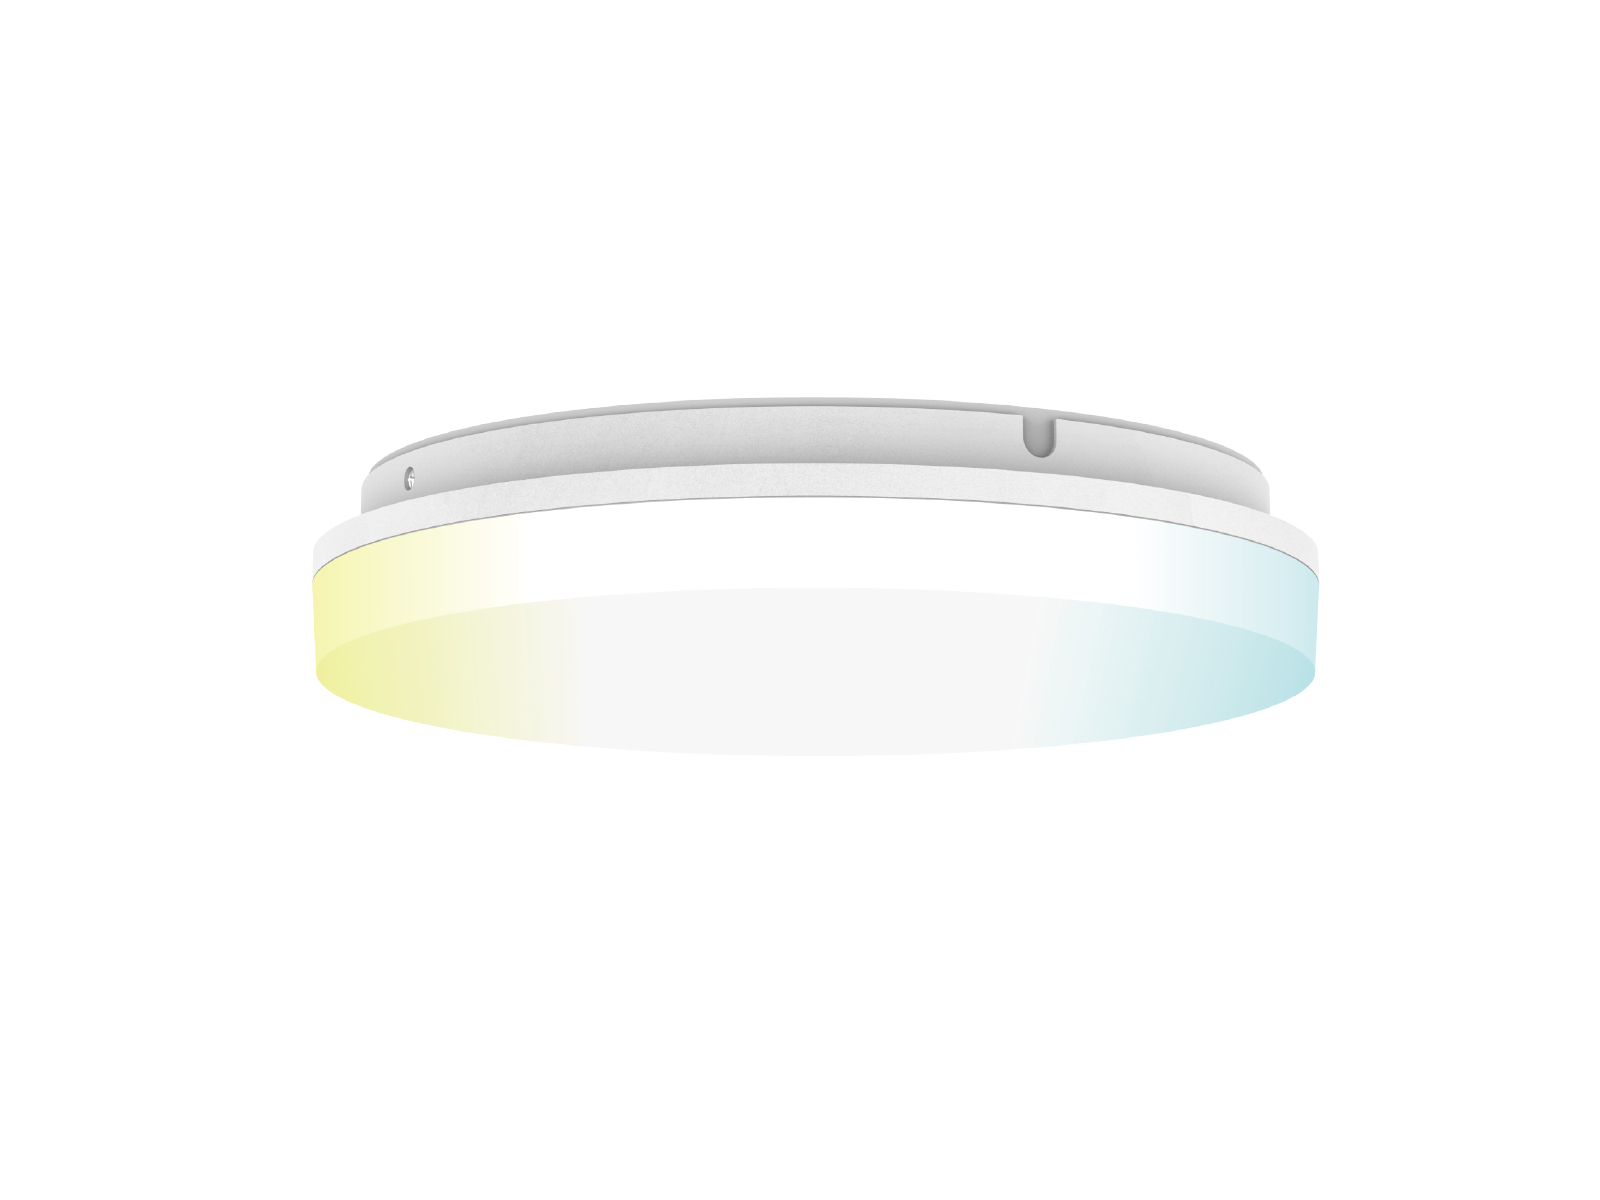 AL53-W/B Fire-rated Material Smart Ceiling Light